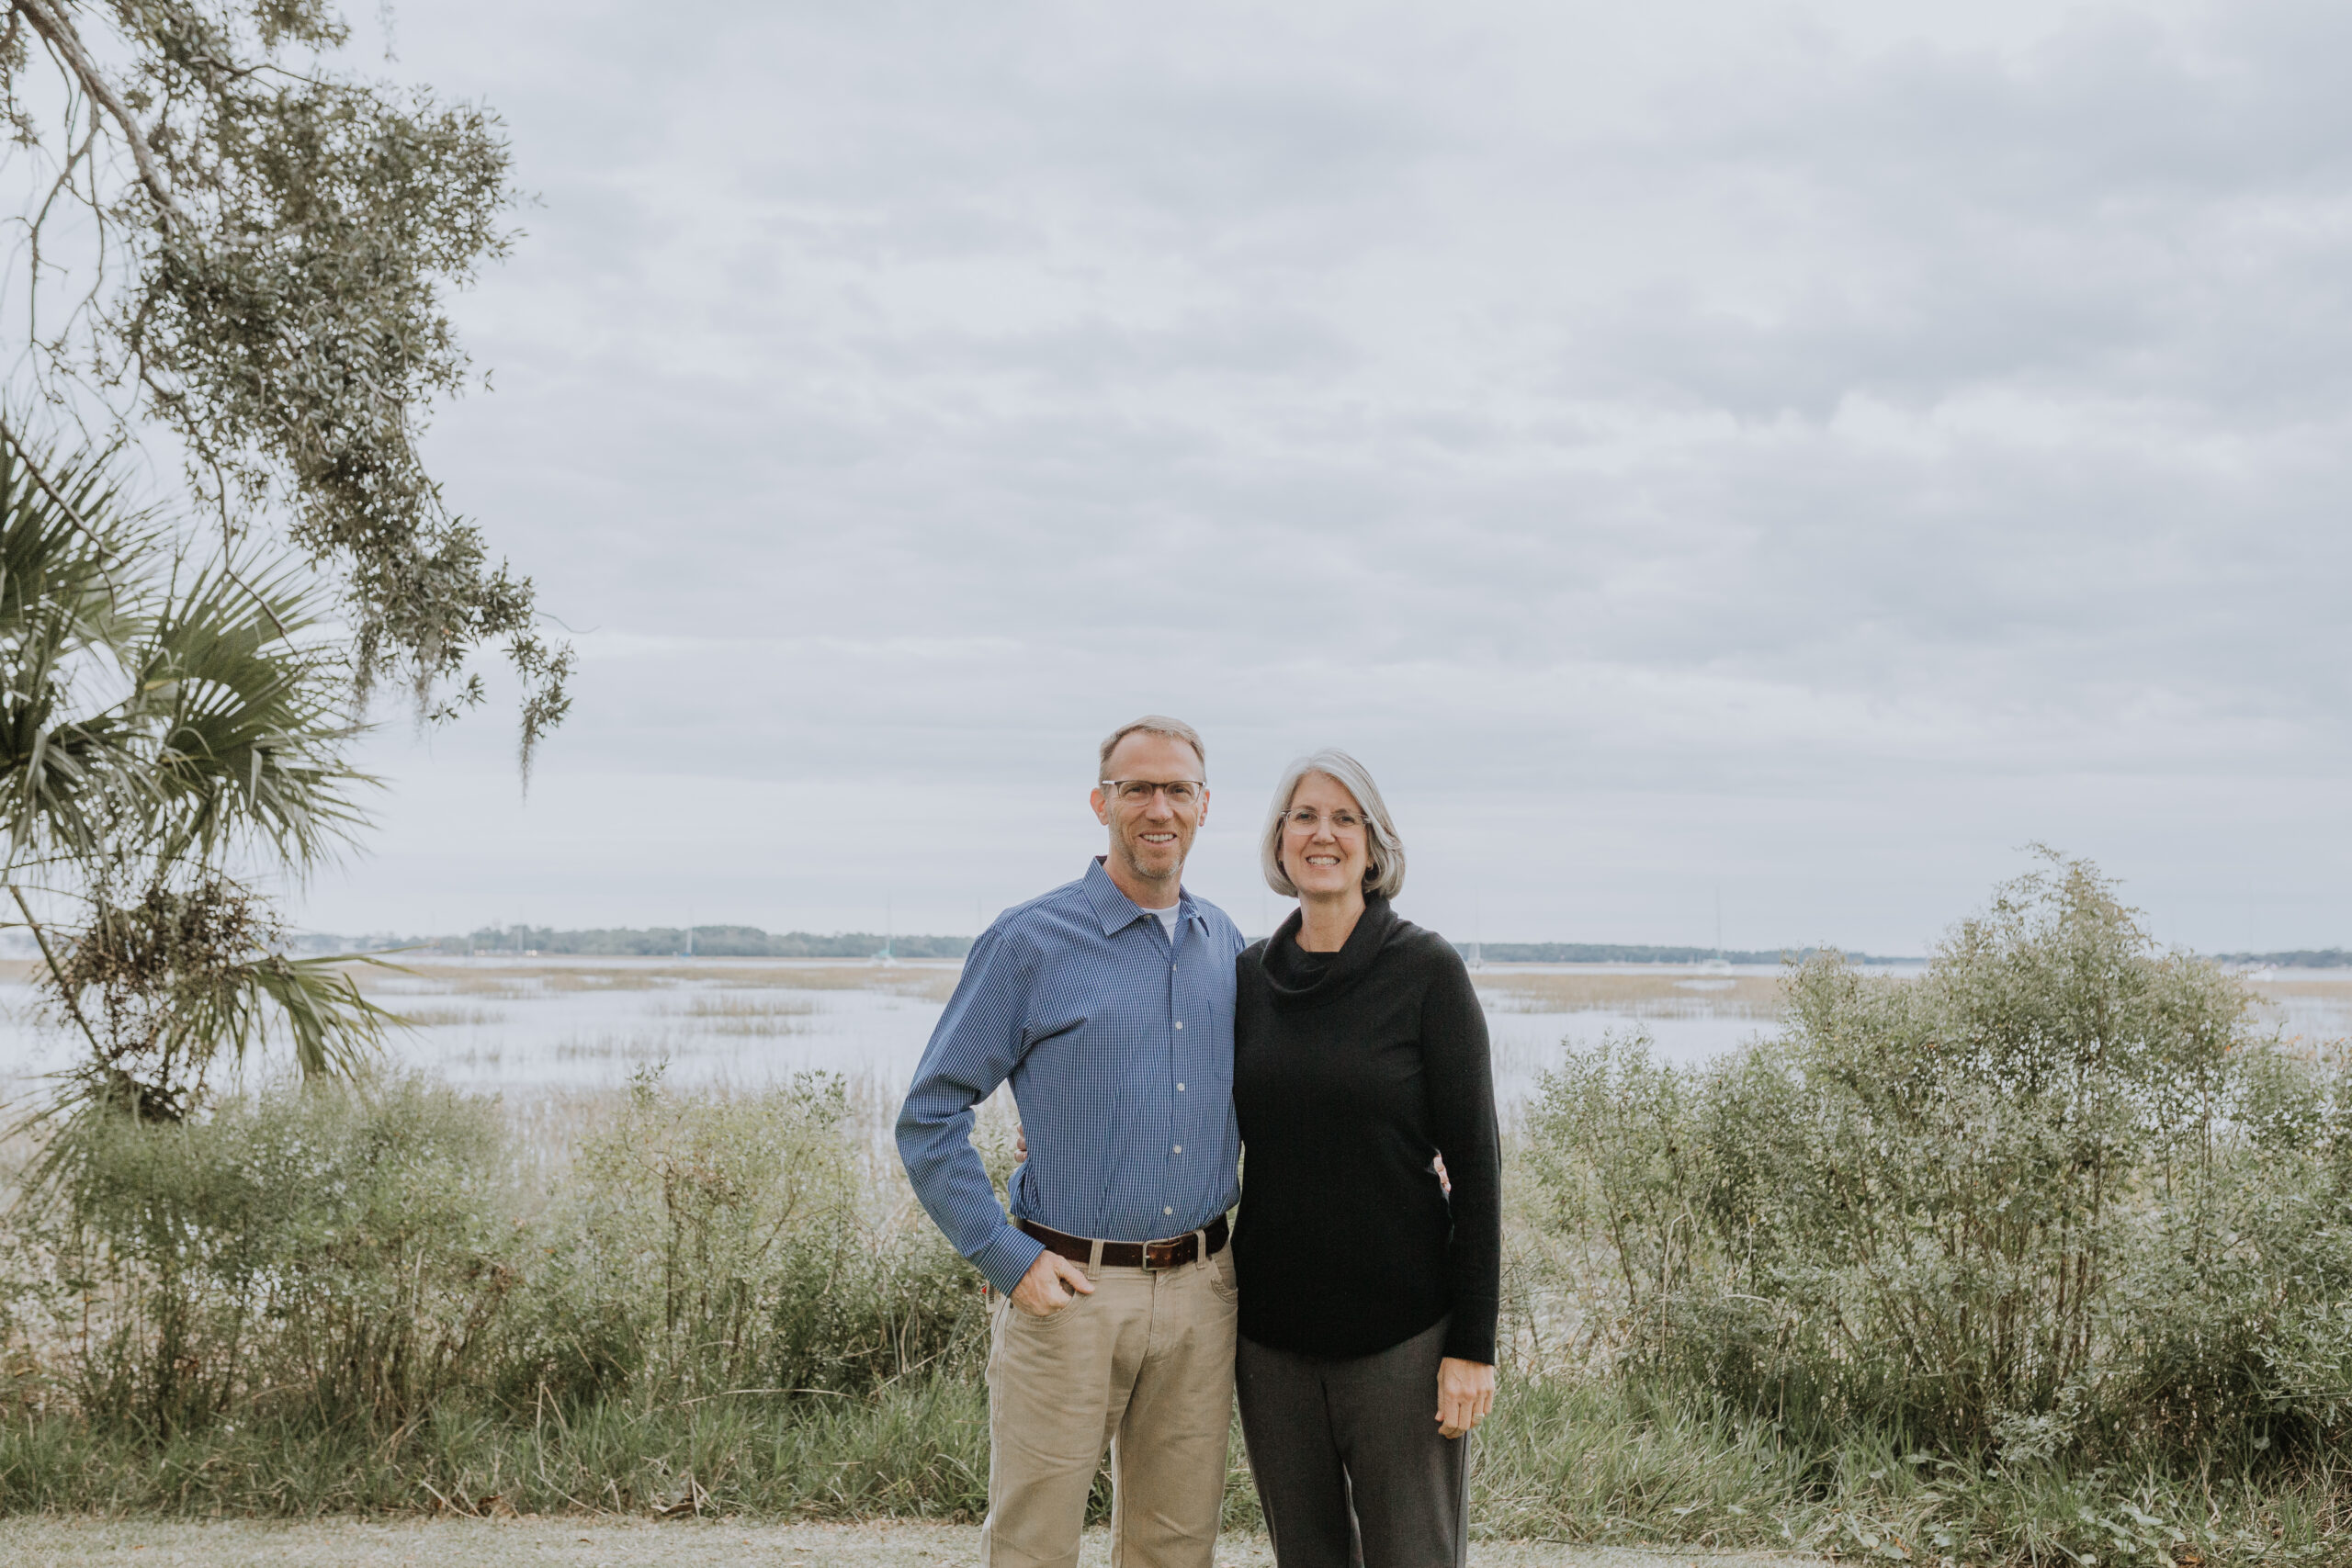 Grey Haired Couple in front of the Bay in Beaufort SC on an overcast day